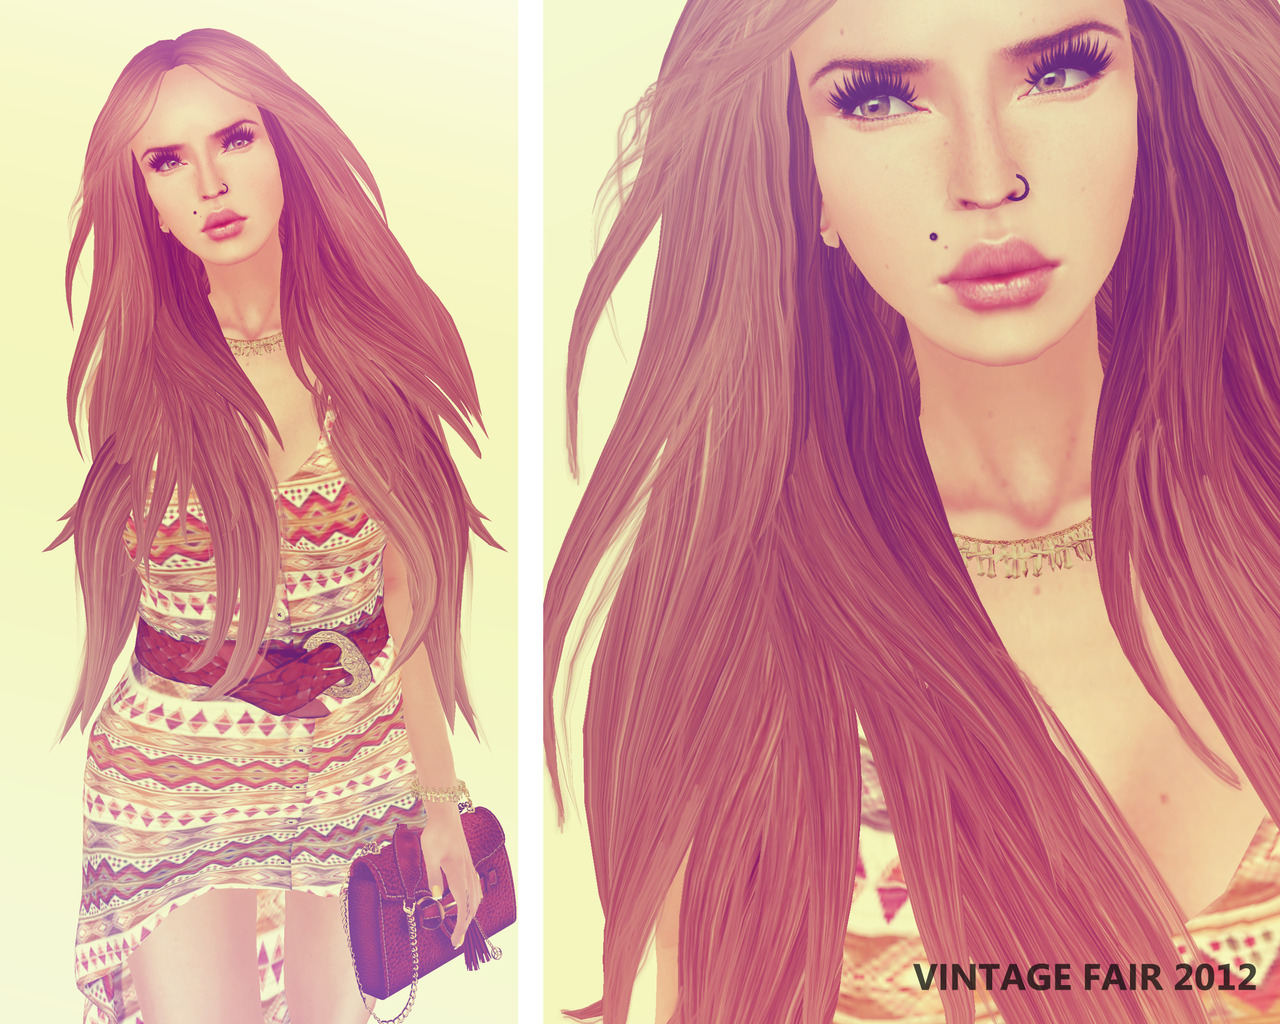 Just the first preview of some items you will be able to purchase at Vintage Fair. First of all, you will find this classic look skin from The Skinnery called Sophia - I&#8217;m wearing the &#8220;Woodstock&#8221; version in honey tone (dark brows option).  The dress will also be available at VF, it&#8217;s by DDL and you have many colors and designs, I chose this one because I felt it matched the tone skin and accesories.Last but not least, I wanted to show you Zenith&#8217;s Cherry Ostrich small bag, which is adorable &lt;3 and pretty detailed.
CREDITS:
Bag: =Zenith=Cherry Ostrich Leather Bag [R Forearm2] (soon @Vintage Fair)
Nails: Deluxe Fingernails  V4.6 by jamman (I will blog about them in detail soon, as they are pretty amazing! I selected this orange french manicure among a lot of options from the nail hud :) )
Necklace and bracelet: Multi Cross gold By Jamman 
Dress: [DDL] For Reasons Unknown (original) M (soon @Vintage Fair)
Hair: [LeLutka]-VICTORIA hair - IdontBleach
Skin: [theSkinnery]Sophia-Woodstock(honey) DB CL2(soon @Vintage Fair)